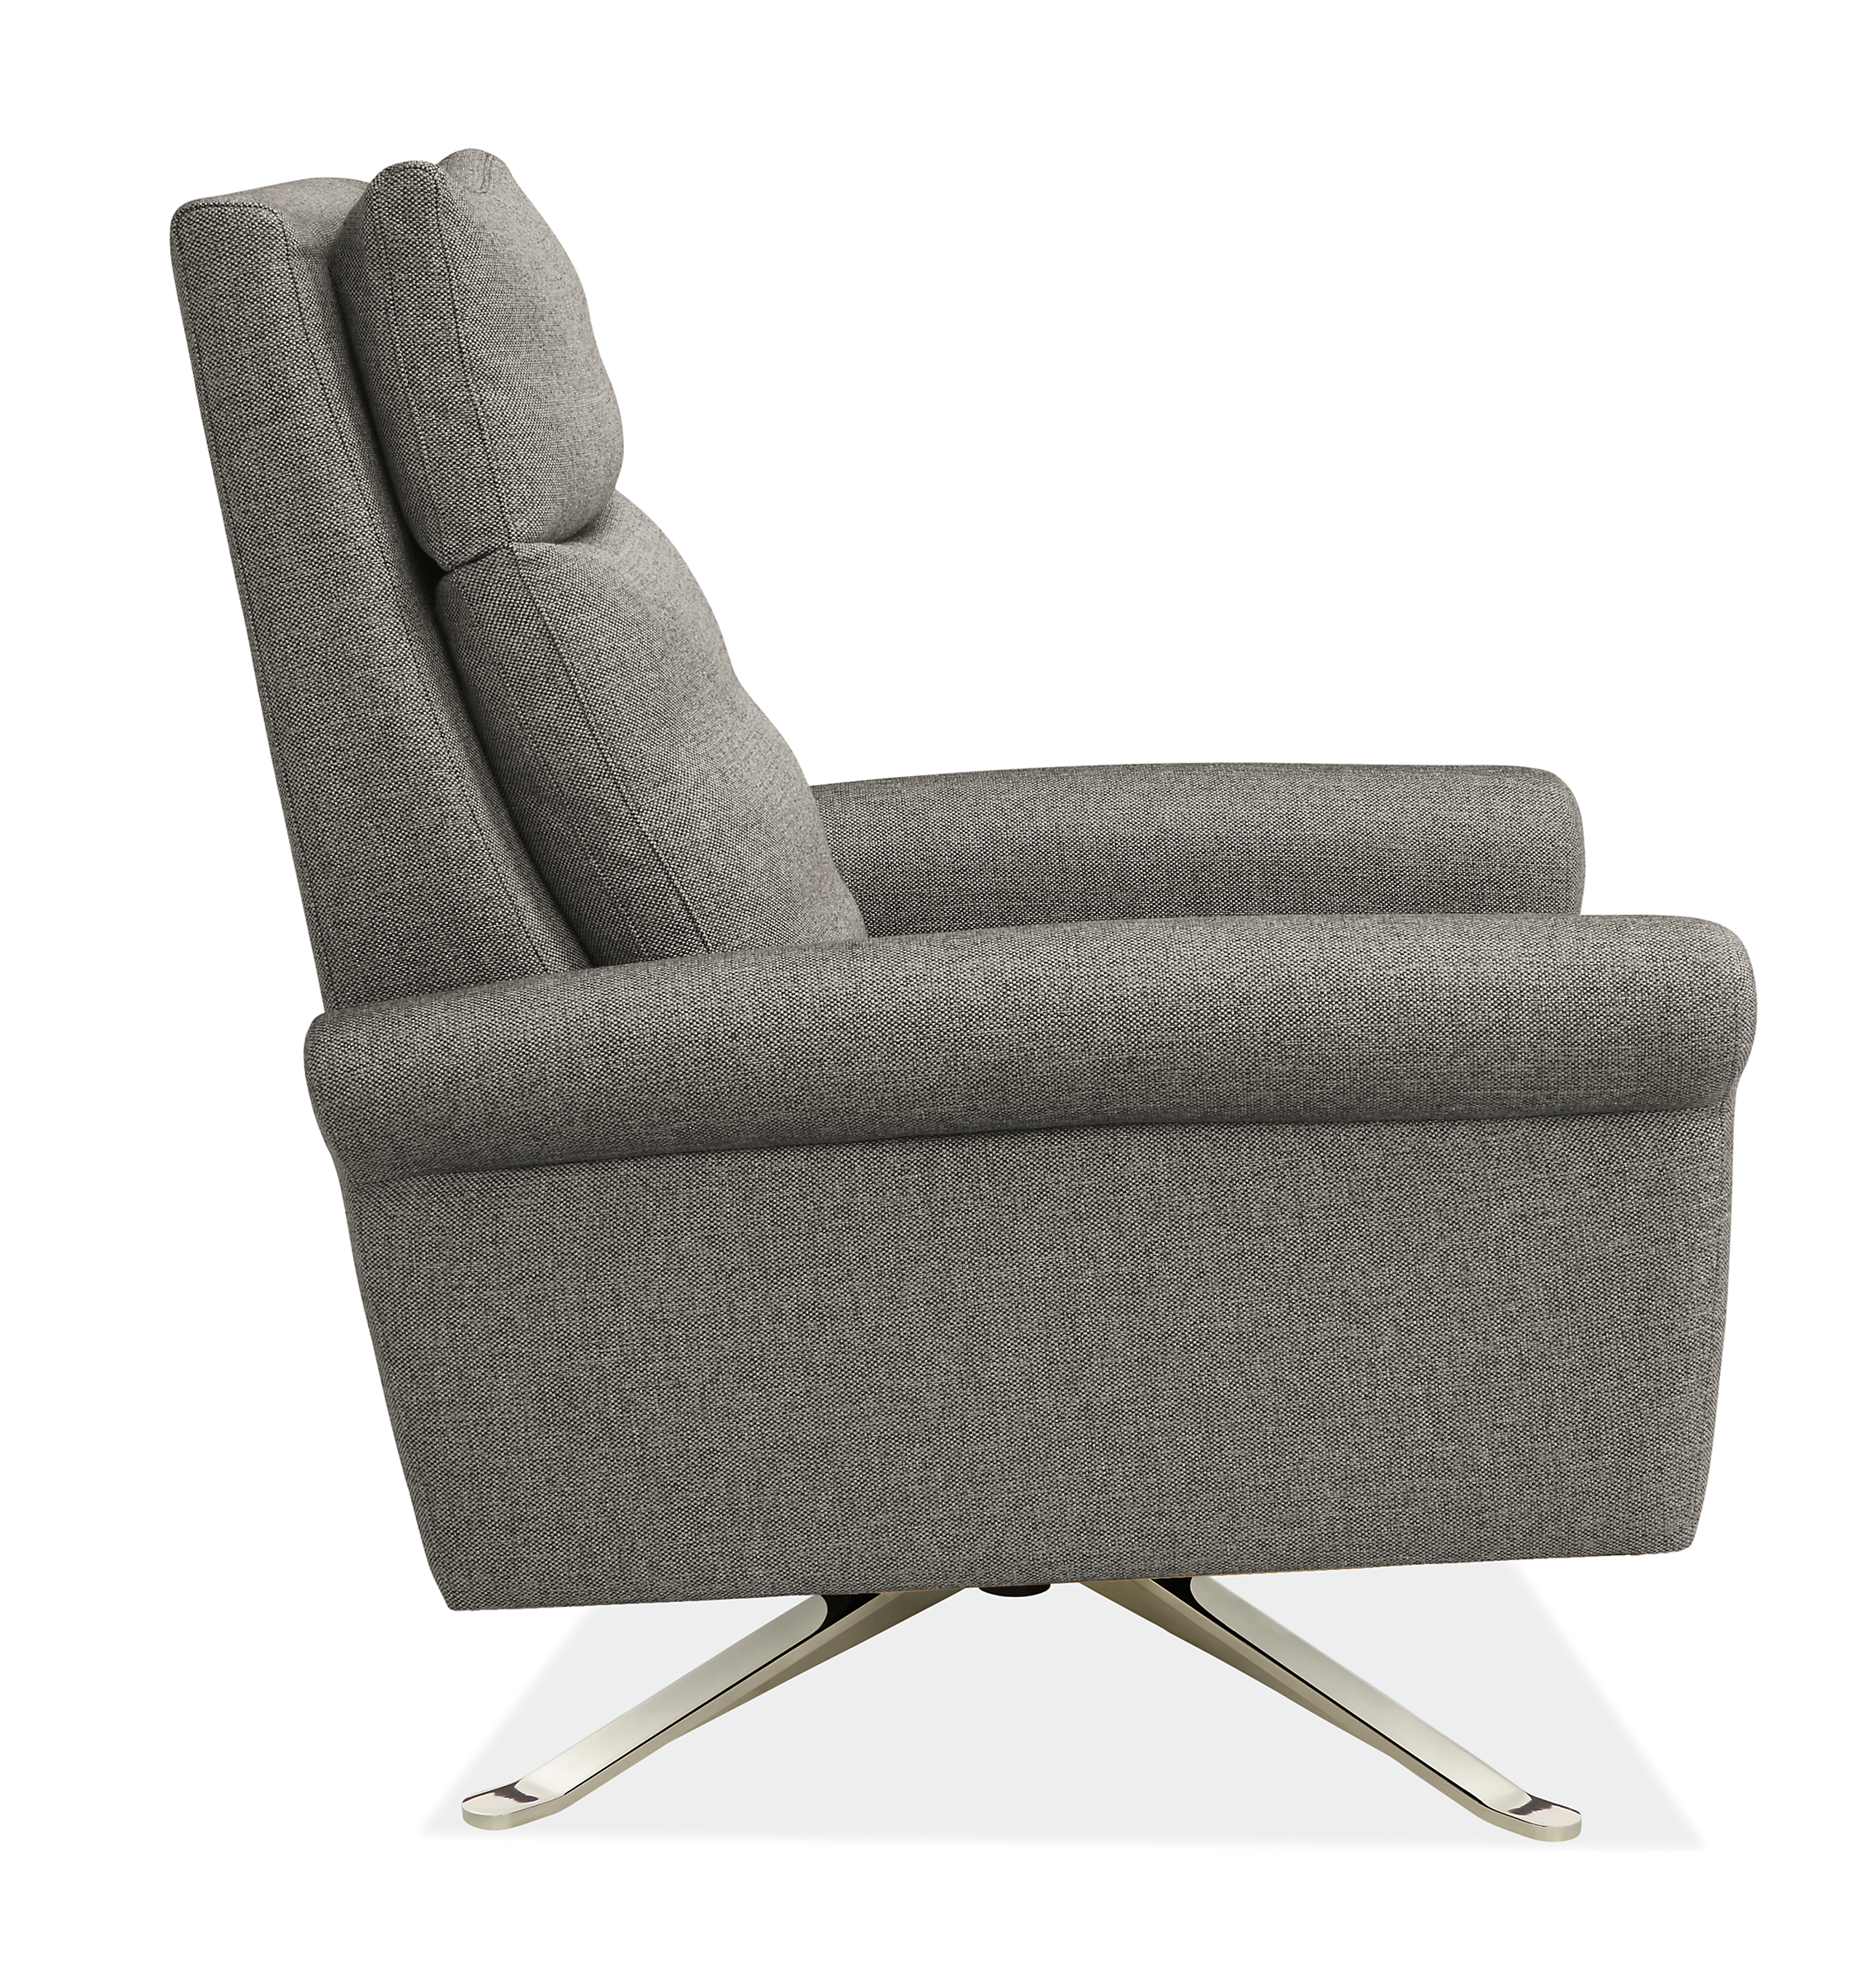 Side view of Isaac Select Recliner Rolled-Arm in Sumner Fabric with Metal Base.